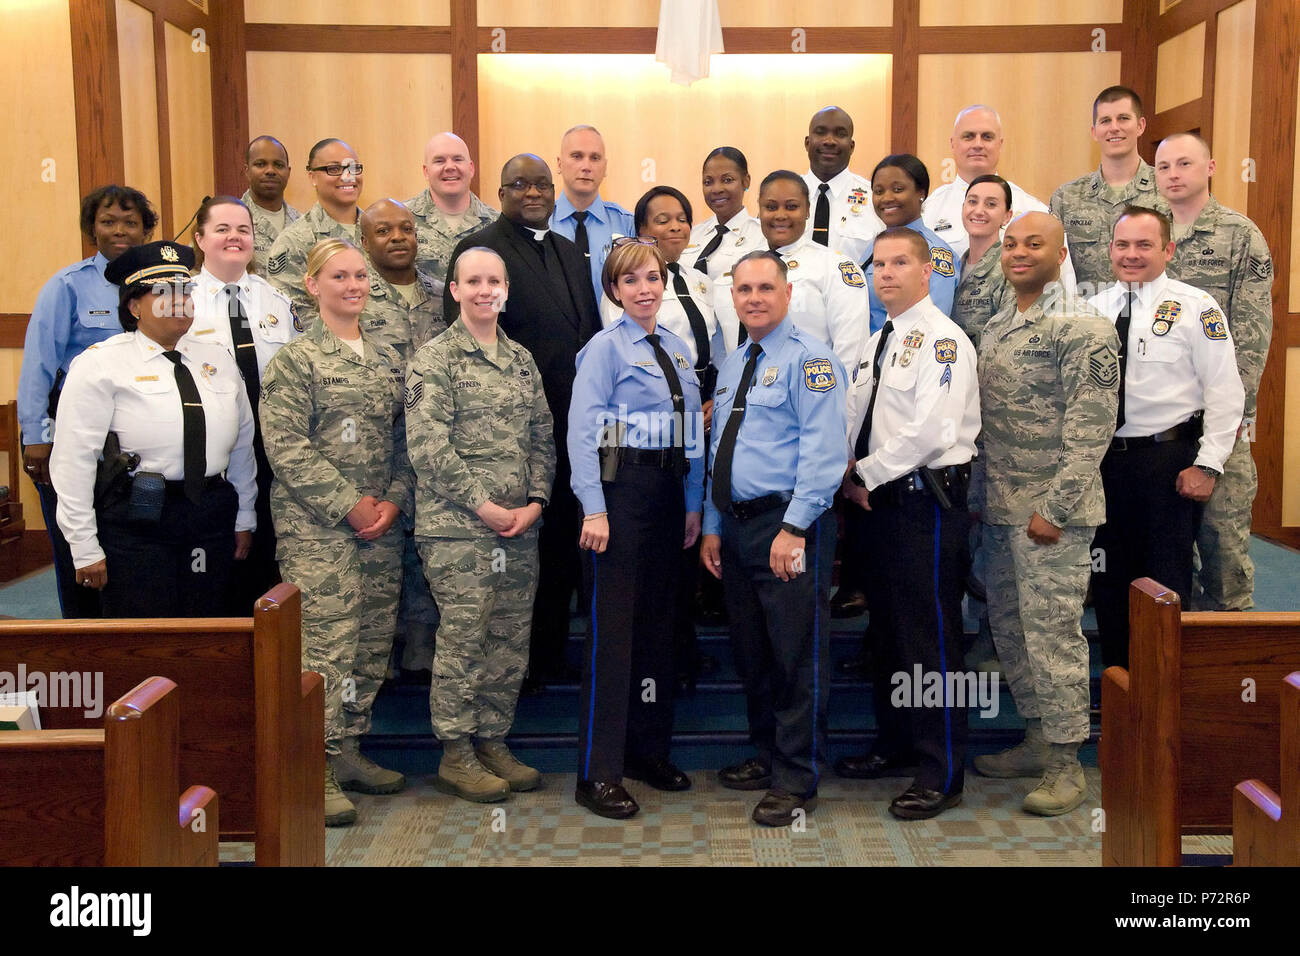 Members of the 436th Security Forces Squadron, Philadelphia Police Department, Philadelphia, Pa., and Base Chapel staff, pose for a group photo May 11, 2017, at Dover Air Force Base, Del. Fifteen members of the police department toured the 436th SFS, Air Force Mortuary Affairs Operations and Base Chapel during their five-hour visit to the base. Stock Photo